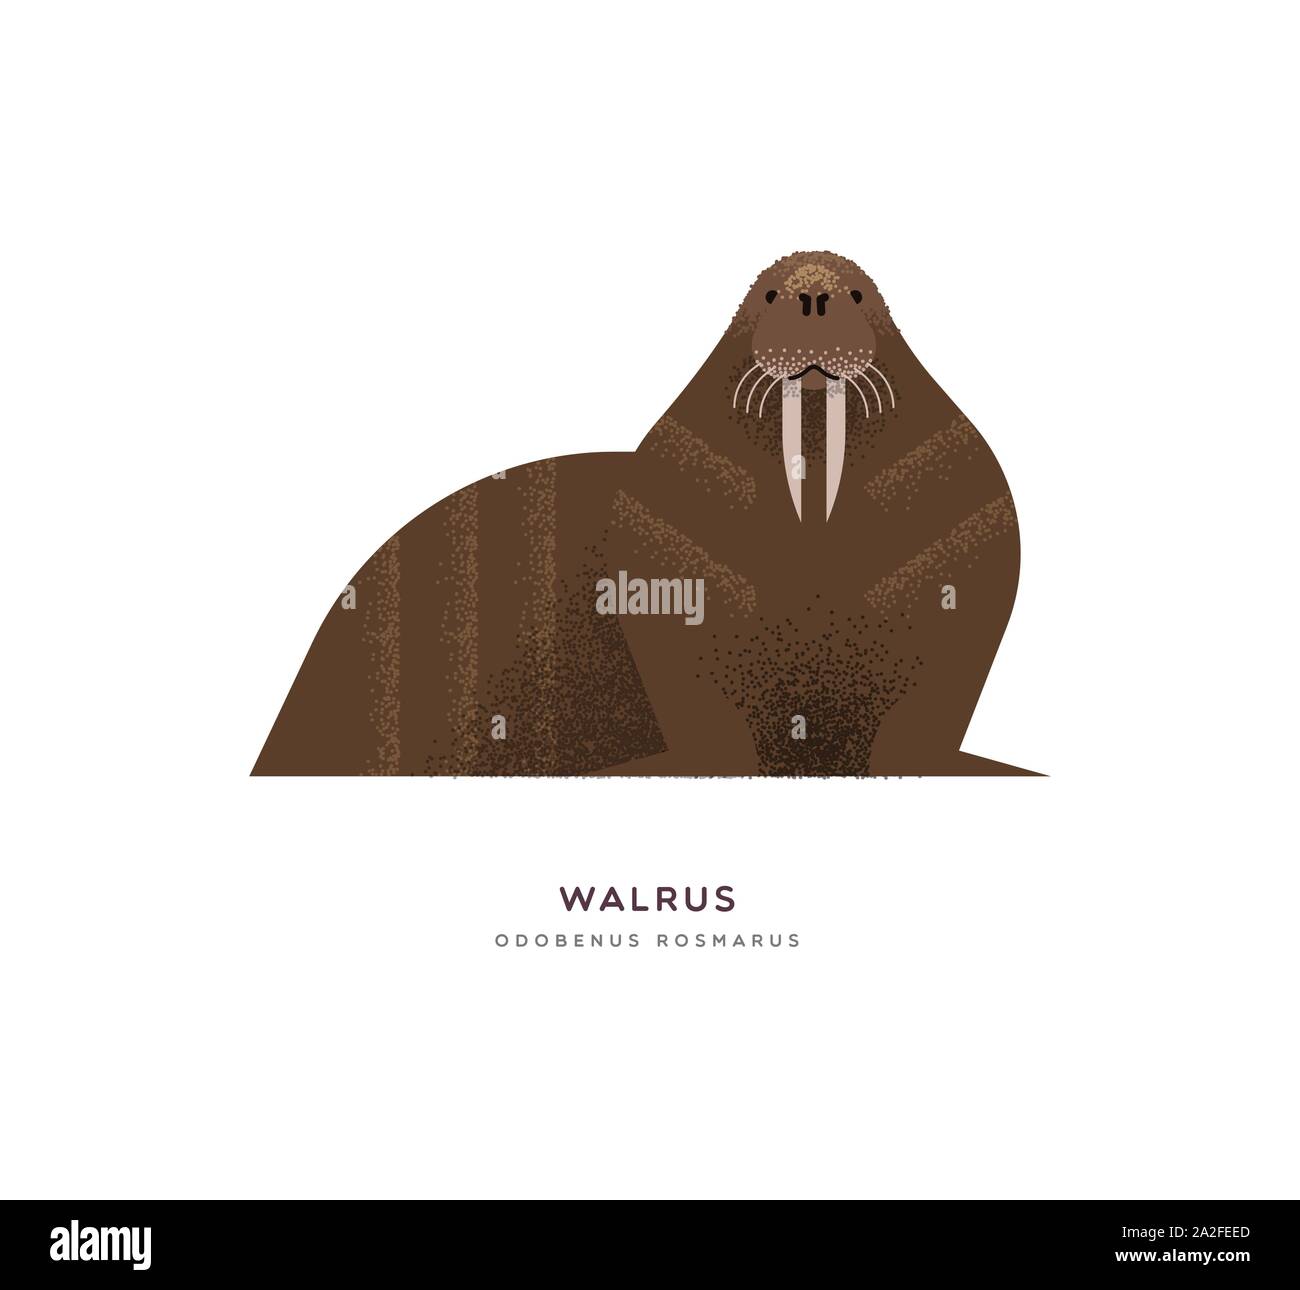 Wild walrus animal illustration on isolated white background. Educational wildlife design with fauna species name label. Stock Vector